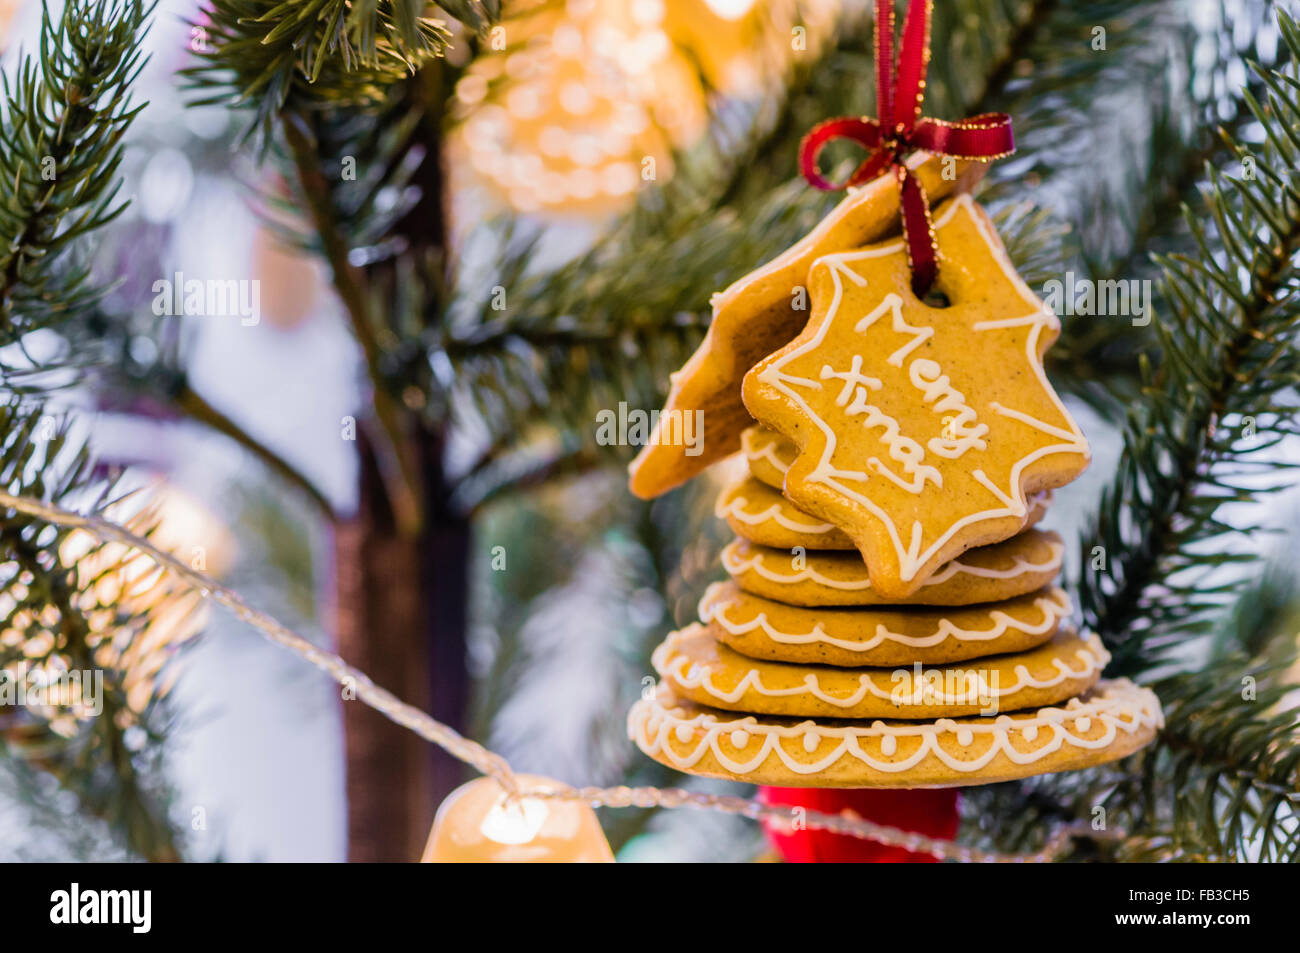 Traditional Czech Christmas decoration made from gingerbread biscuits, in the shape of a bell. Stock Photo